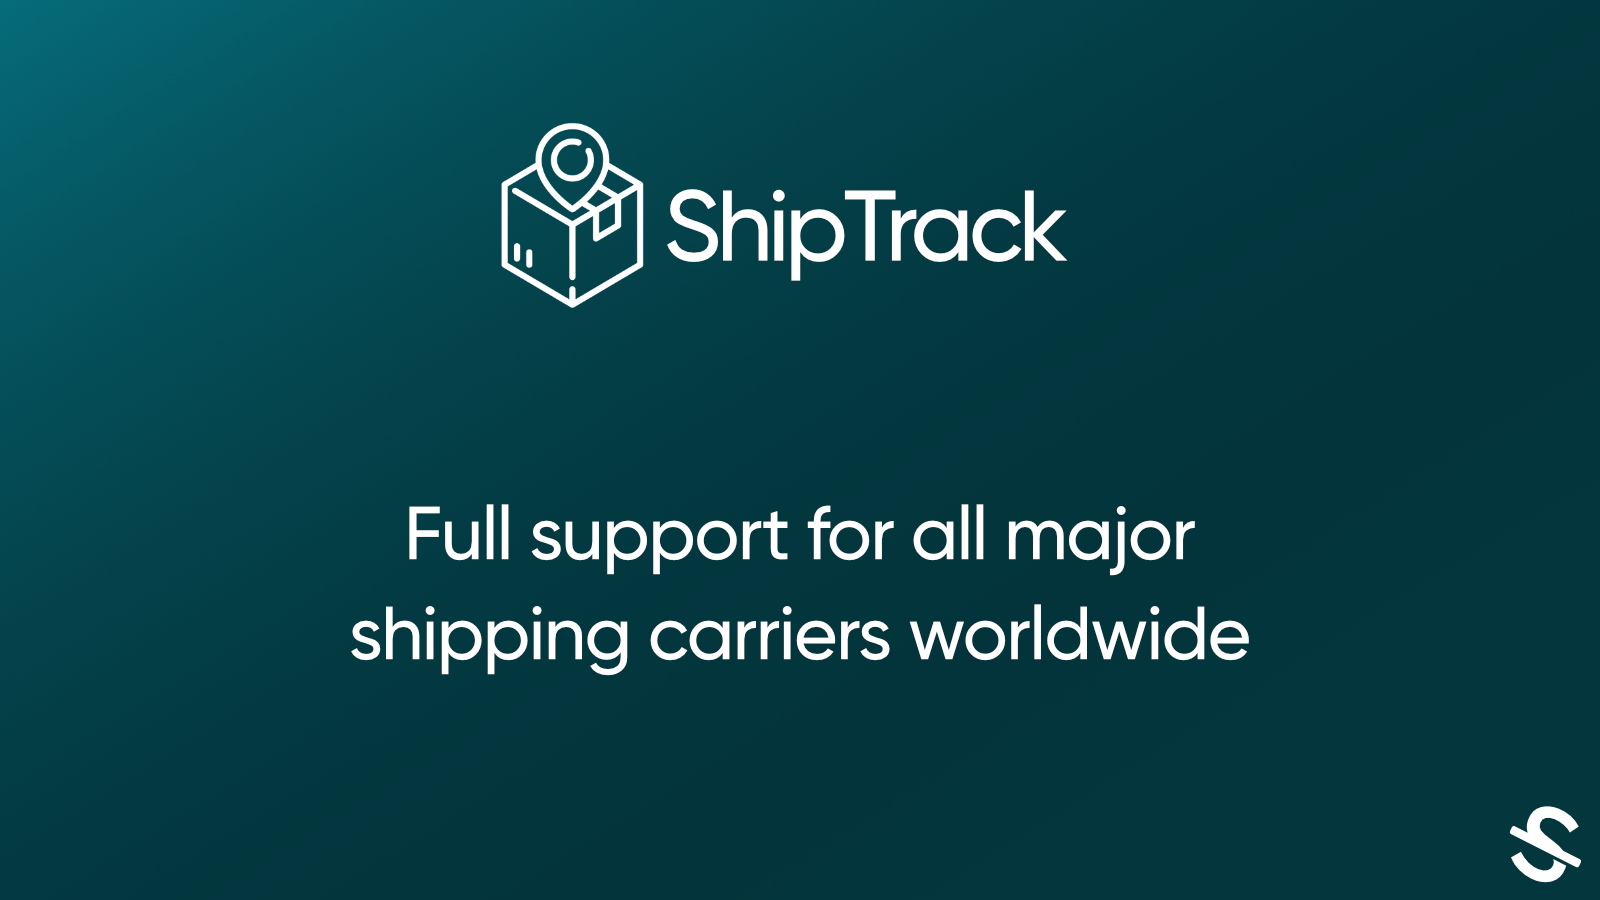 Full support for all major shipping carriers worldwide